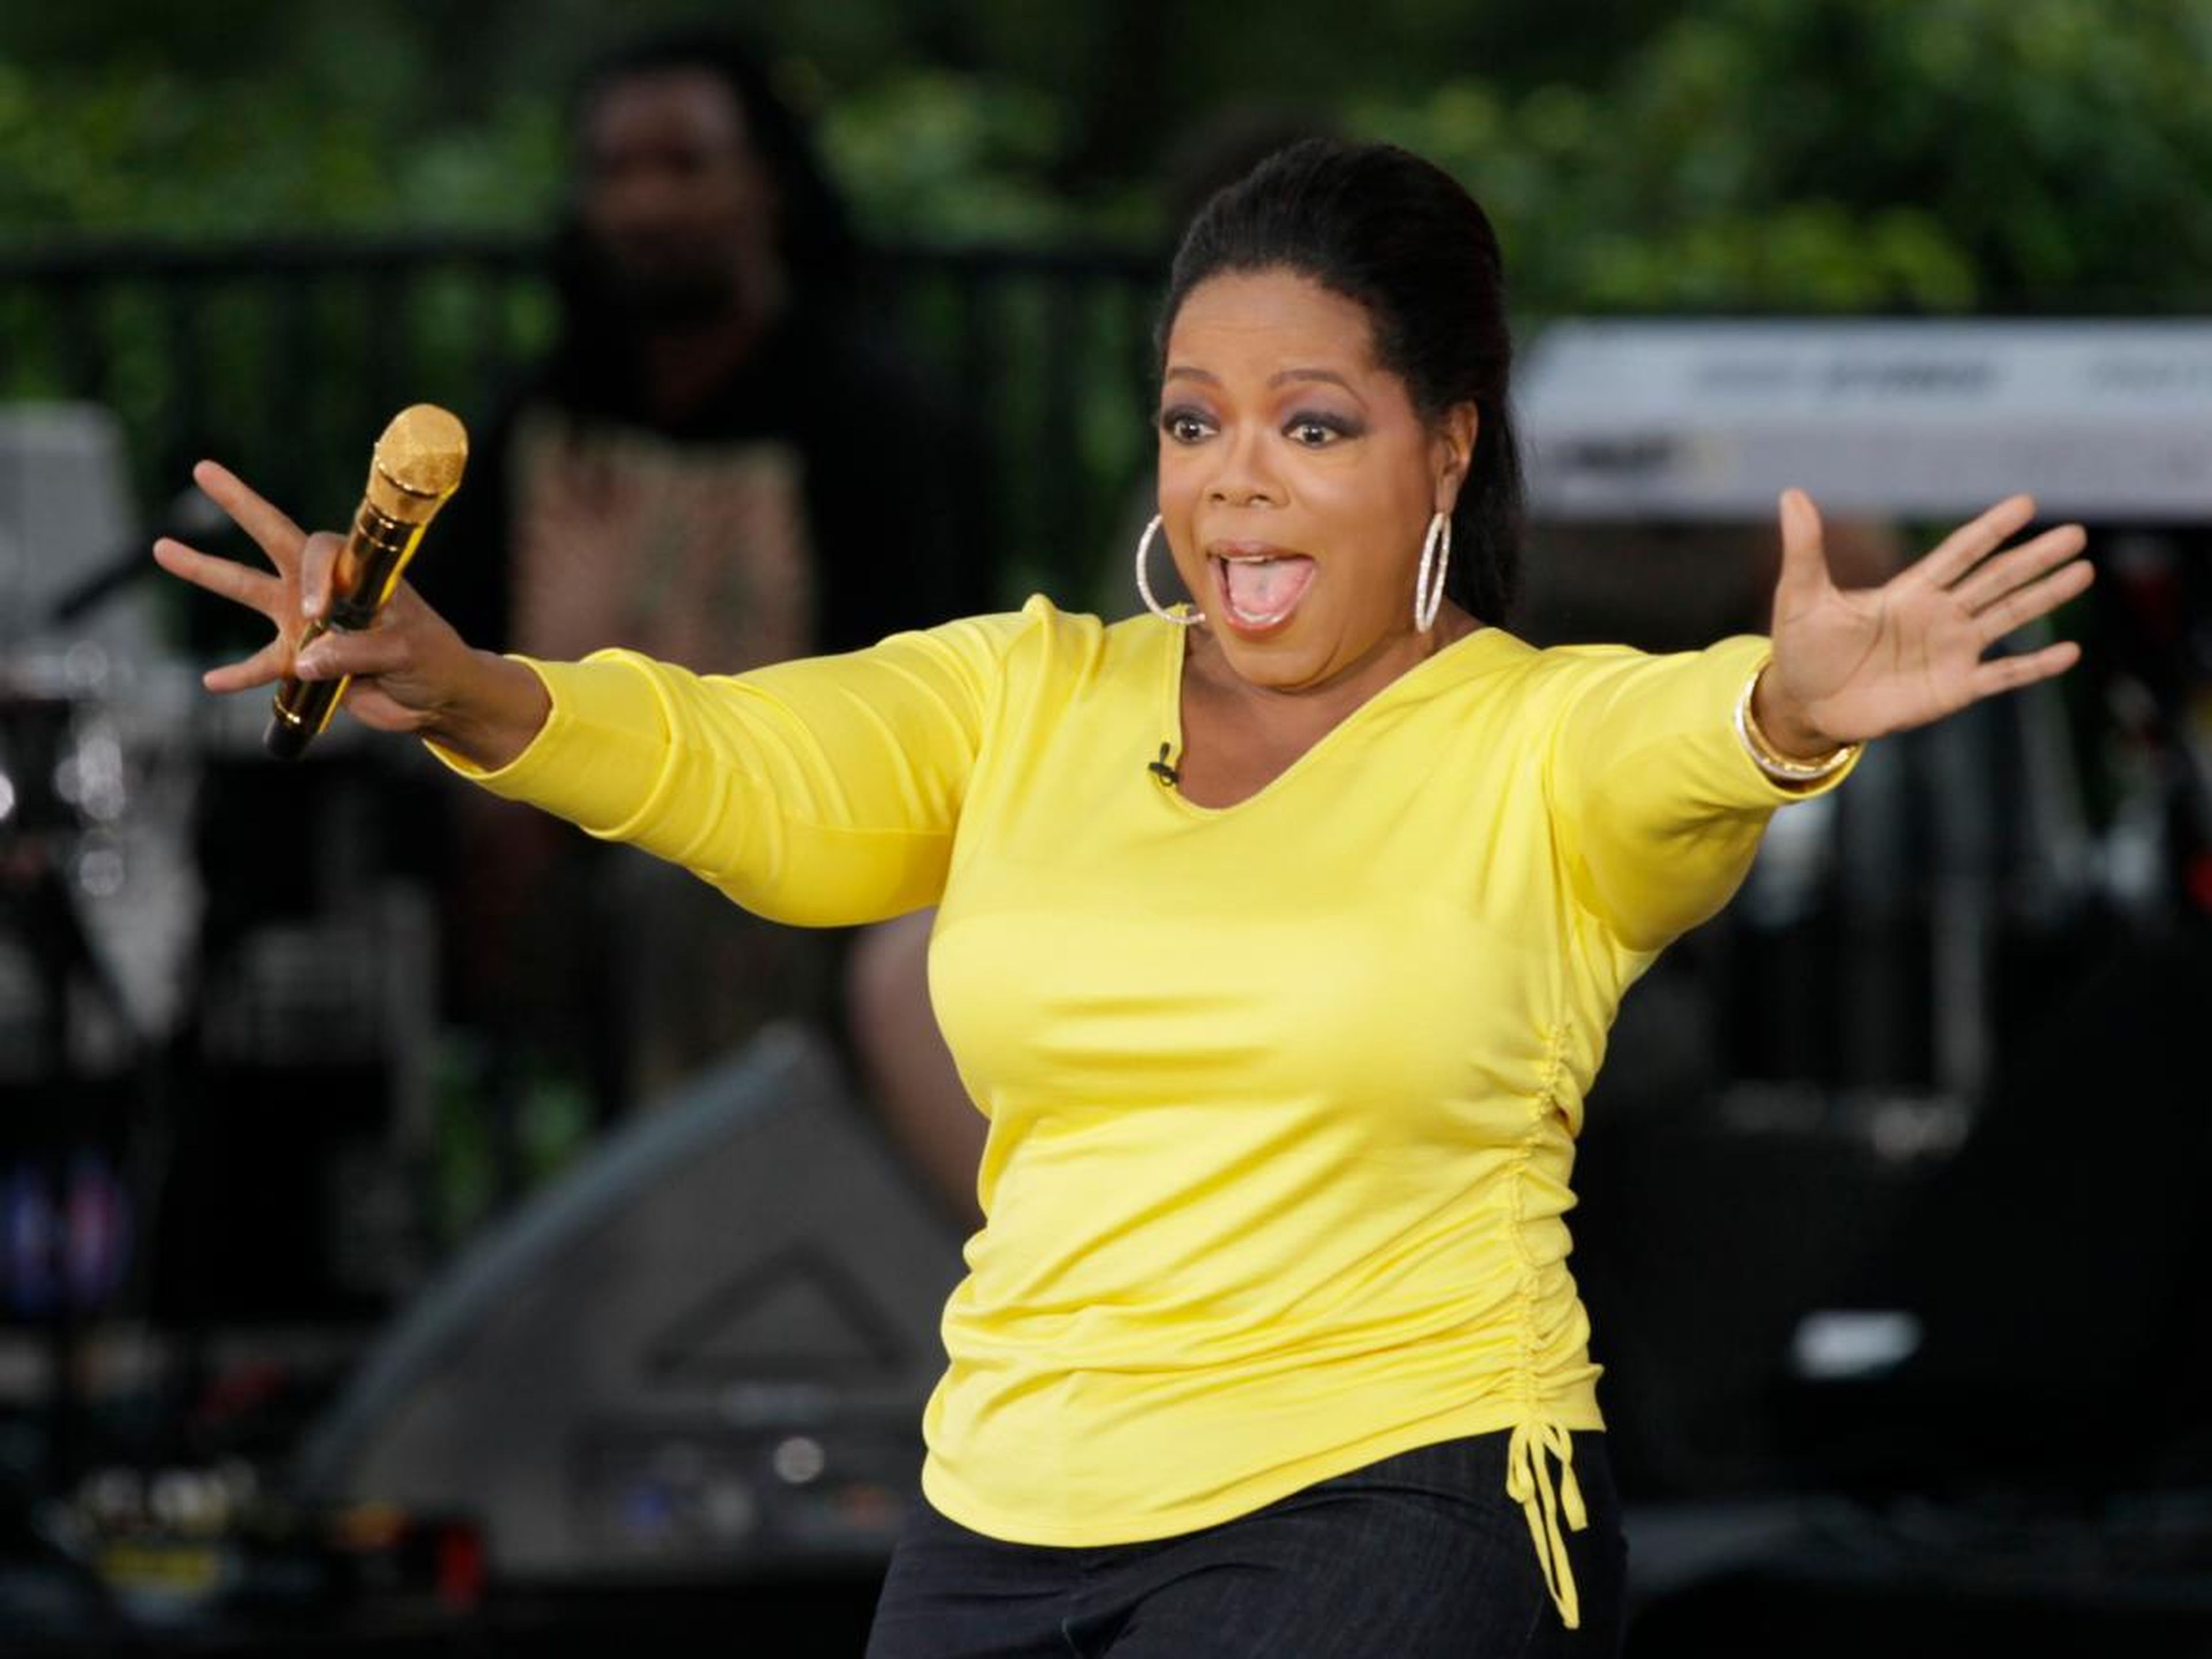 Oprah Winfrey's workouts include "45 minutes of cardio six mornings a week, four to five strength-training sessions a week, incline crunches, and stretching," according to her trainer.